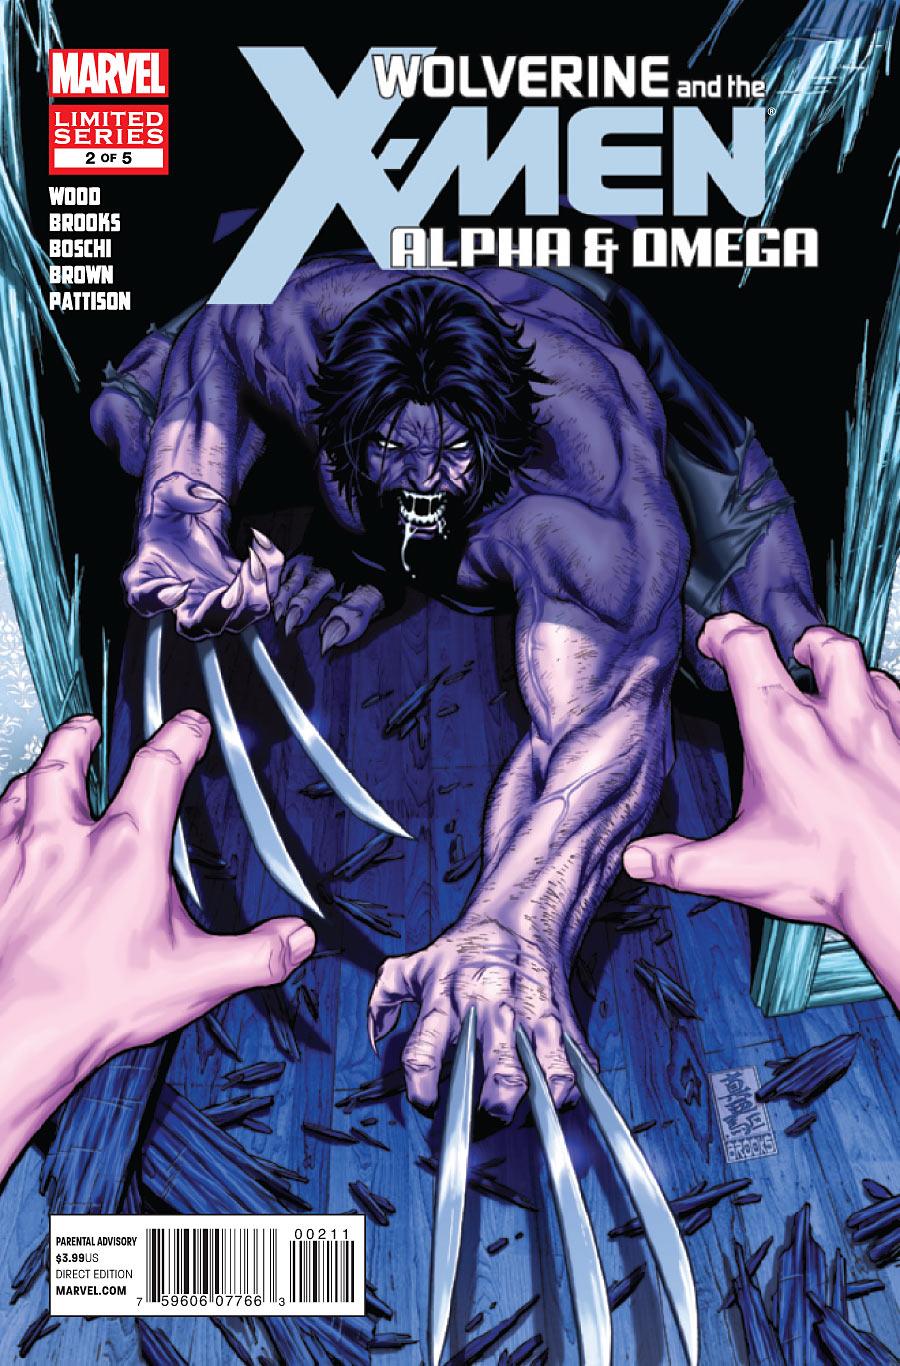 Wolverine and the X-Men: Alpha & Omega Vol. 1 #2